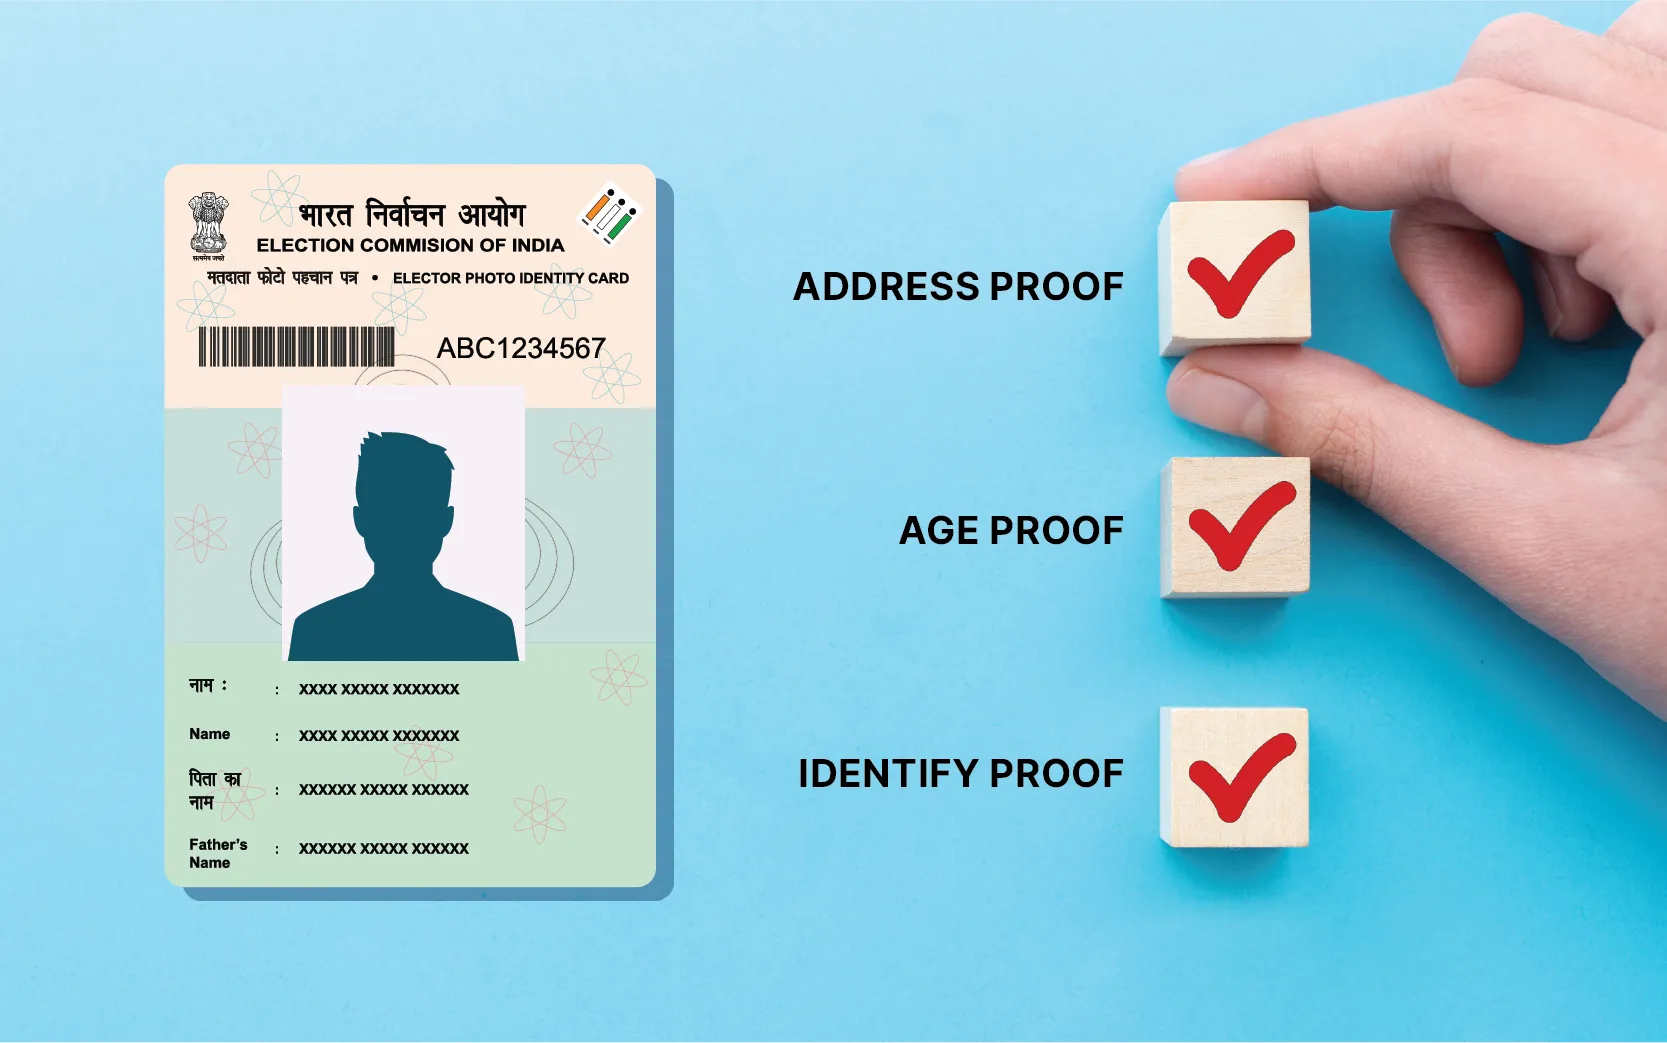 How to Apply for a New Voter ID Card: Get Your Voter ID Here!